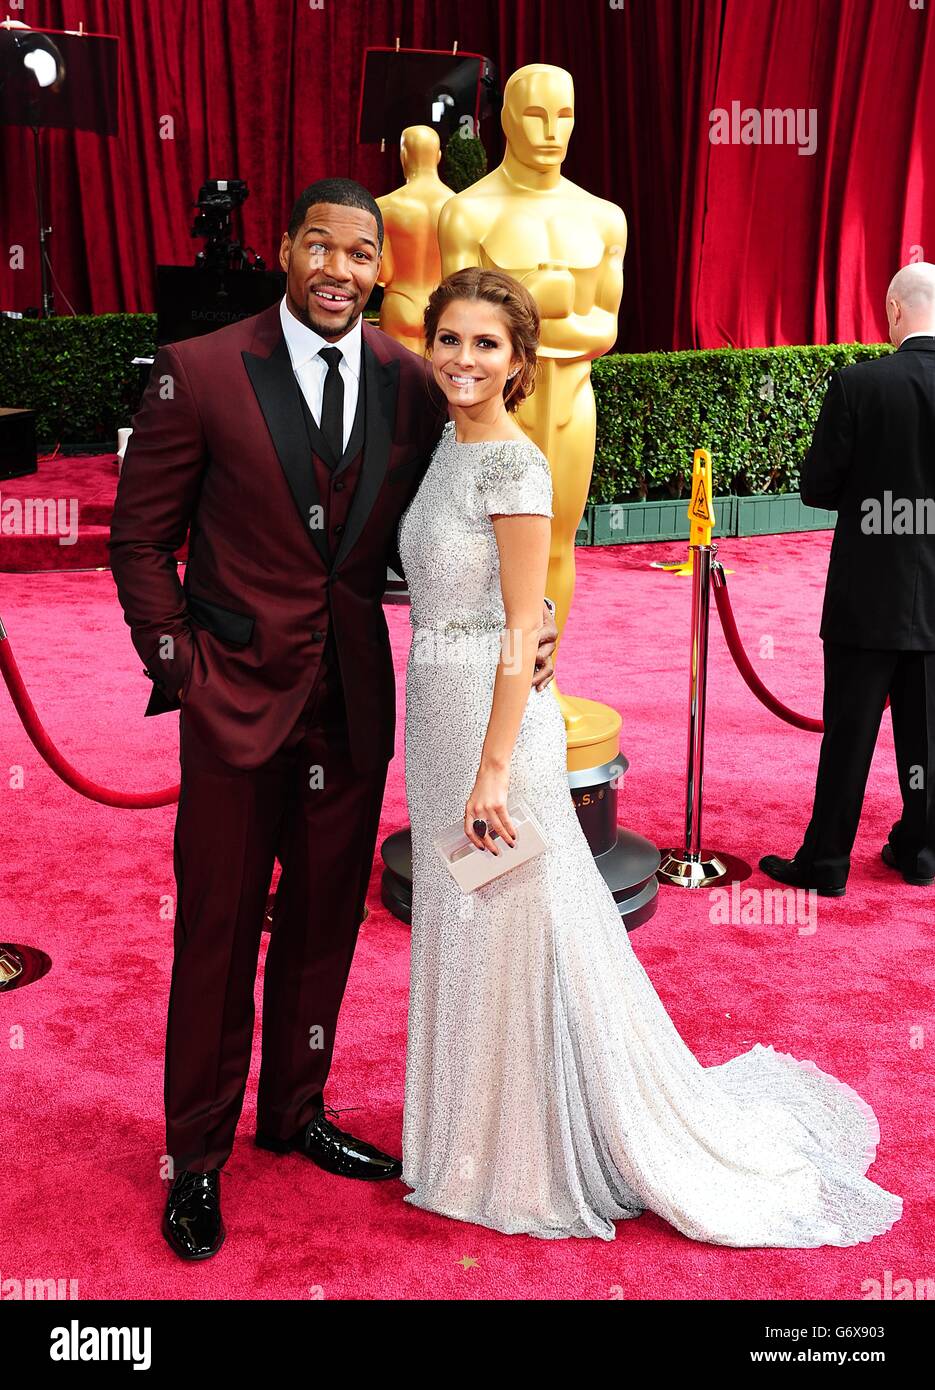 Maria Menounos and Michael Strahan arriving at the 86th Academy Awards held at the Dolby Theatre in Hollywood, Los Angeles, CA, USA, March 2, 2014. Stock Photo